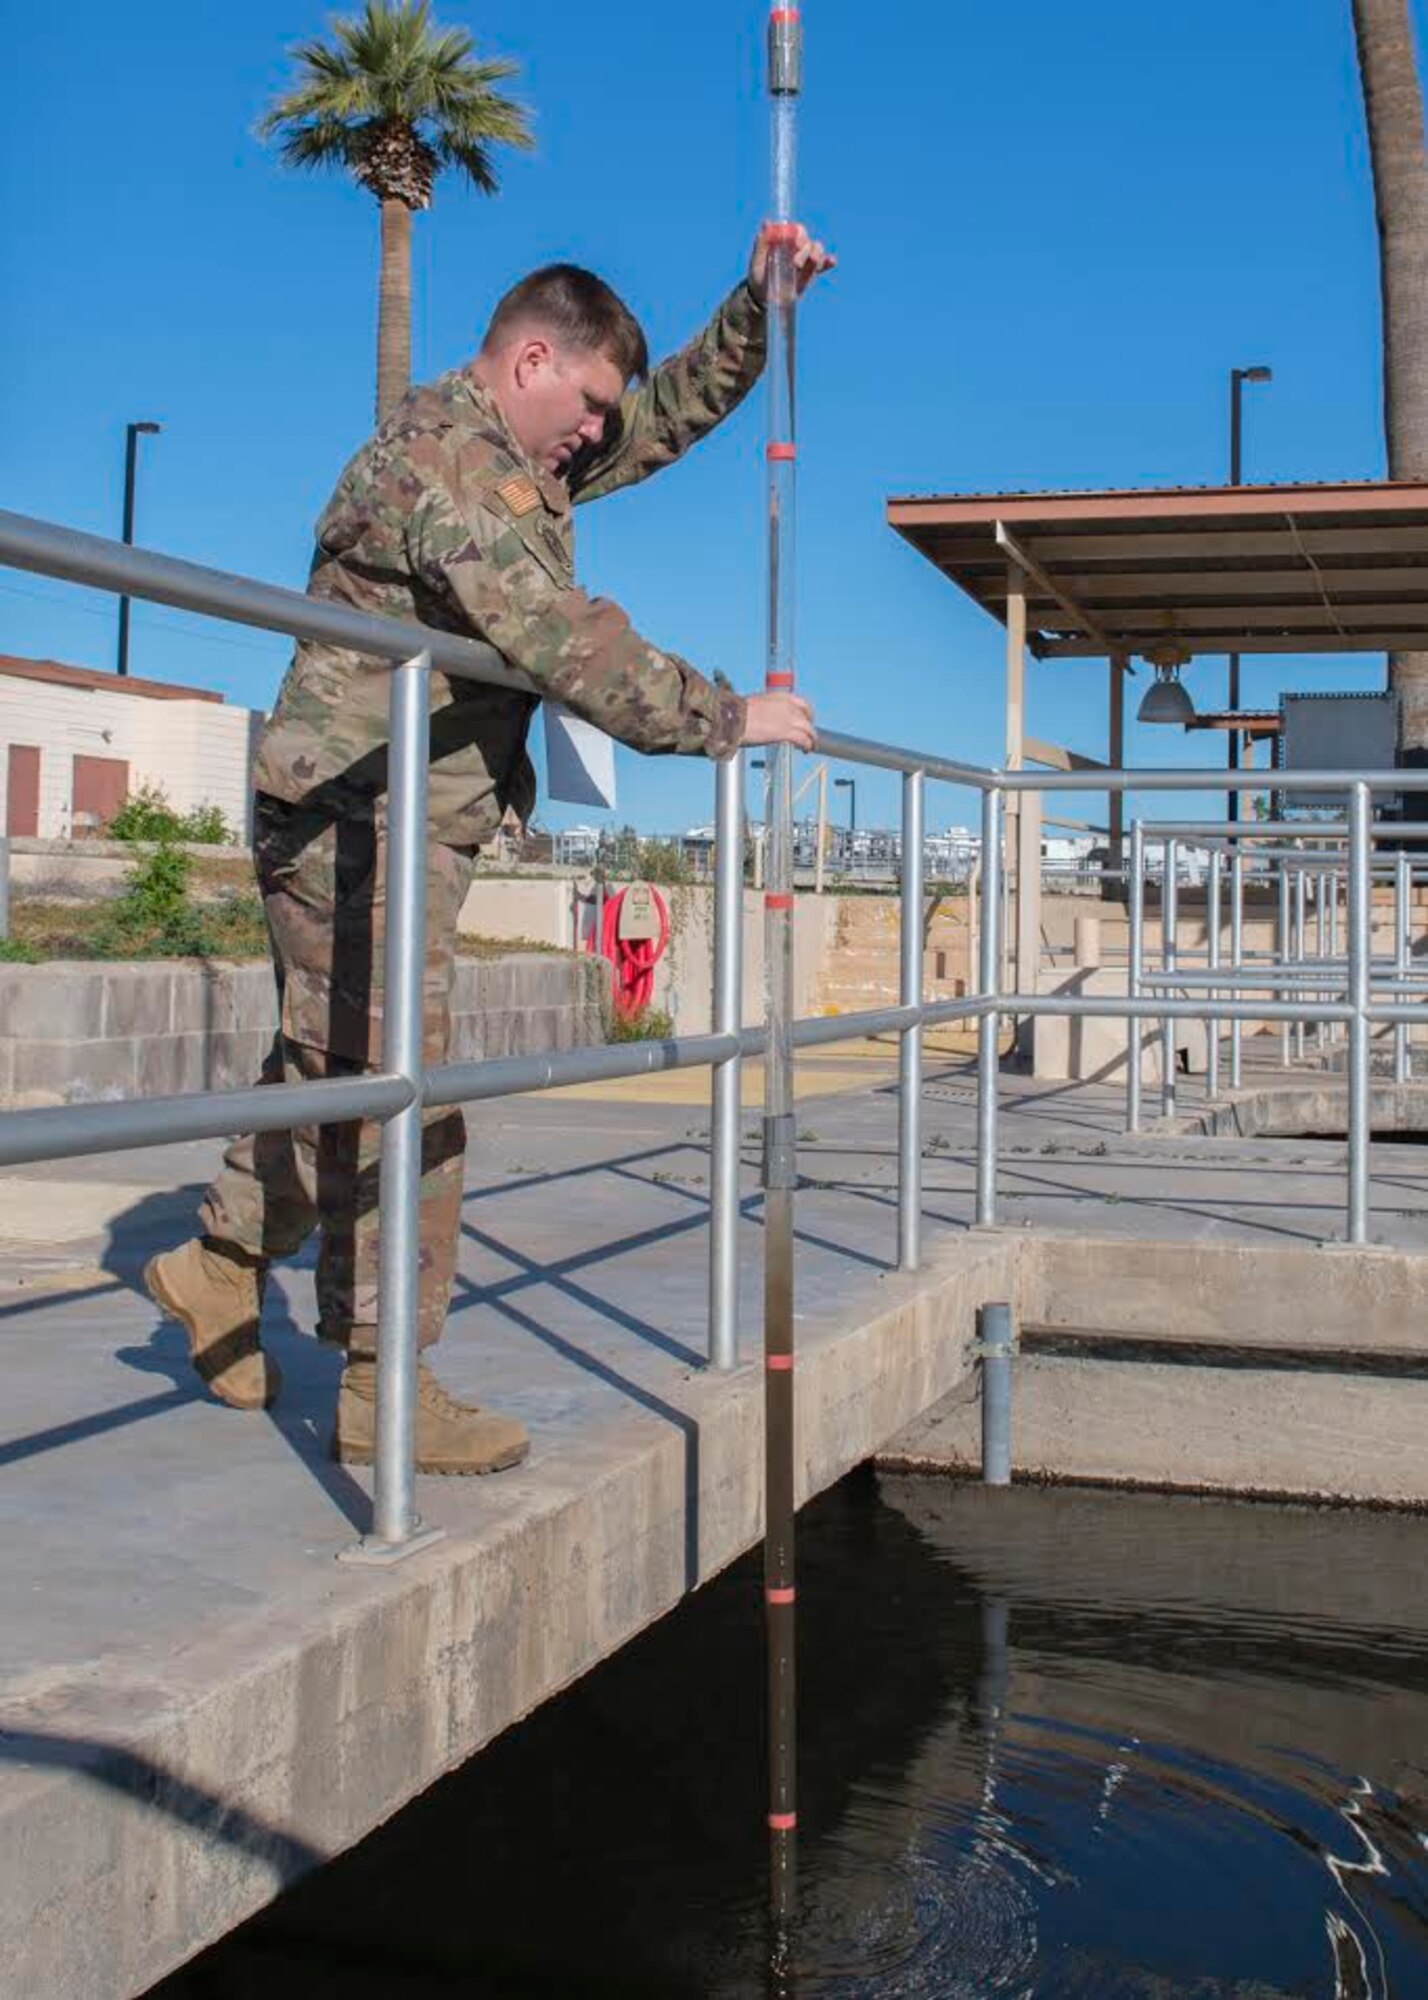 Tech. Sgt. George Vollmer, 56th Civil Engineer Squadron water and fuels systems maintainer, checks if there is proper distribution of water and sewage sludge in the water tanks Jan. 10, 2020, at the Luke Air Force Base Wastewater Plant in Ariz.